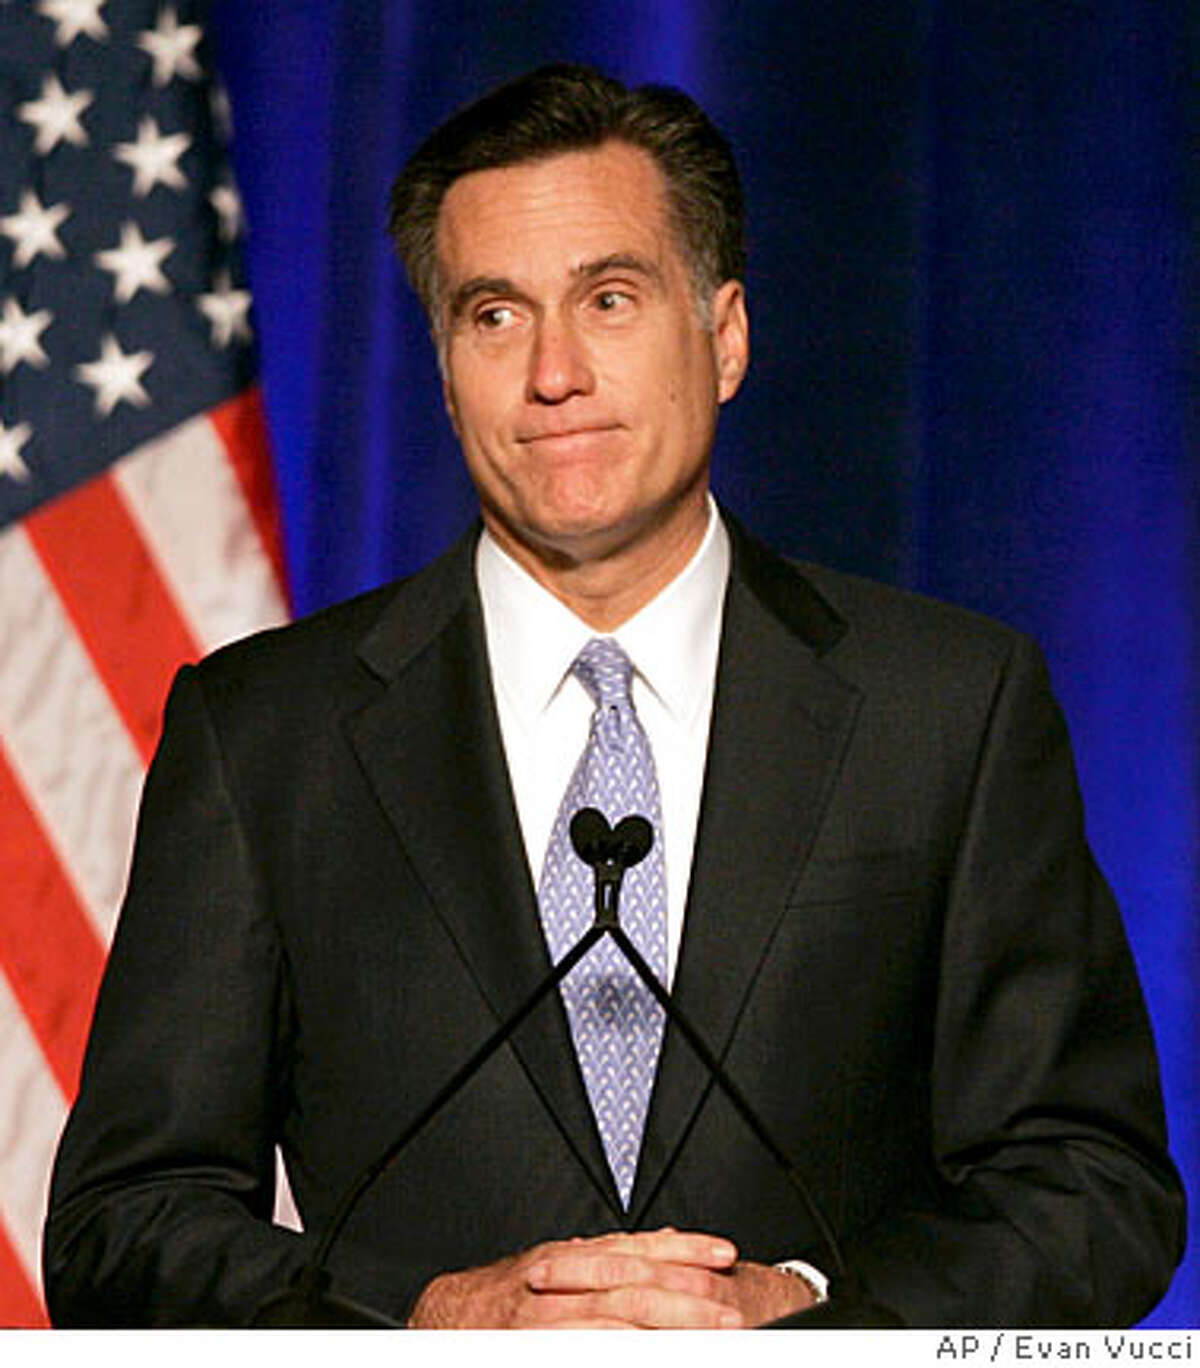 Former Massachusetts Gov. Mitt Romney pauses during a speech before the Conservative Political Action Conference, Thursday, Feb. 7, 2008, in Washington, where he announced he was suspending his faltering presidential campaign. (AP Photo/Evan Vucci)